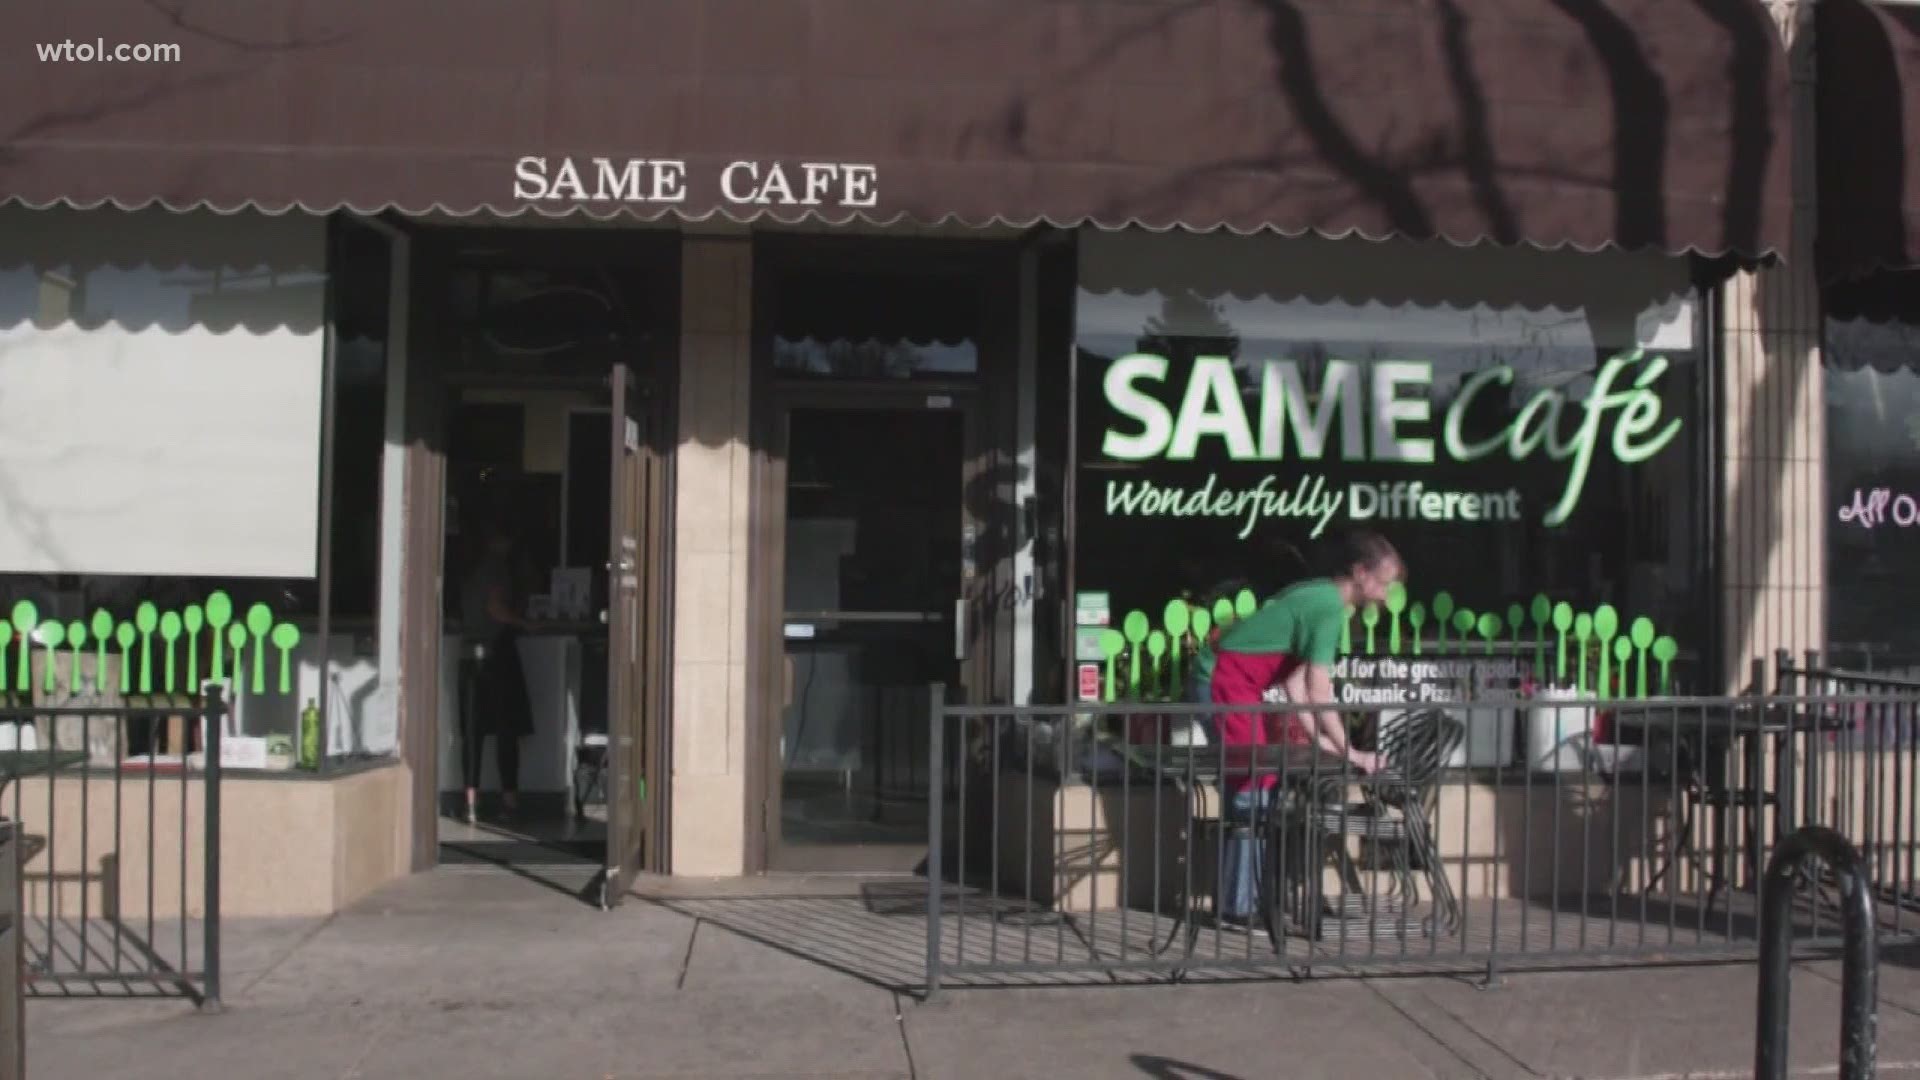 SAME Cafe, short for So All May Eat, lets people pay for their meal by volunteering time, donating money or giving produce to use for future meals.